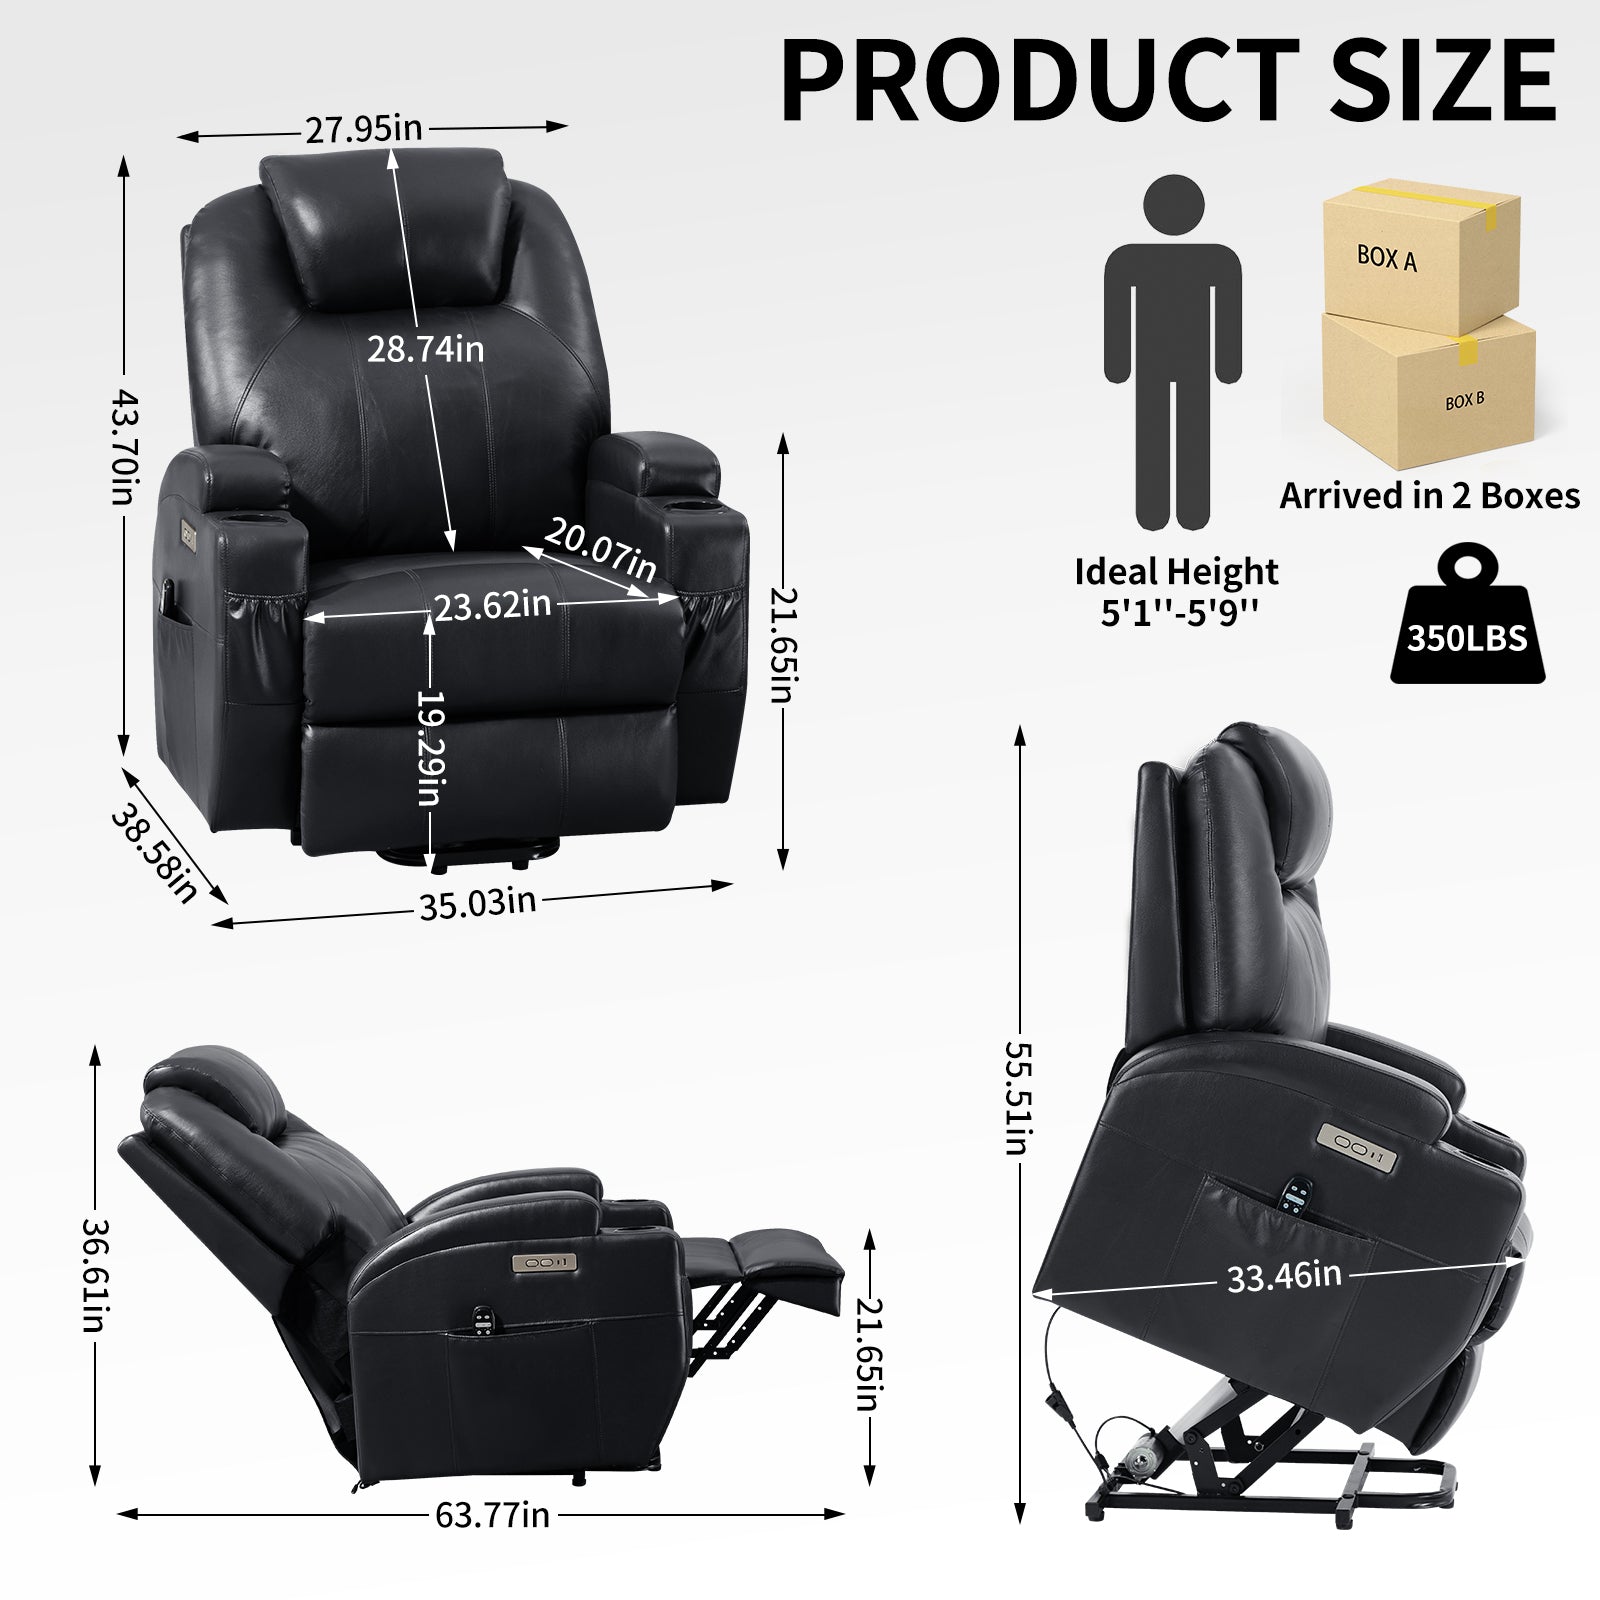 Power Lift Recliner Chair with Massage and Lumbar Heating, Black